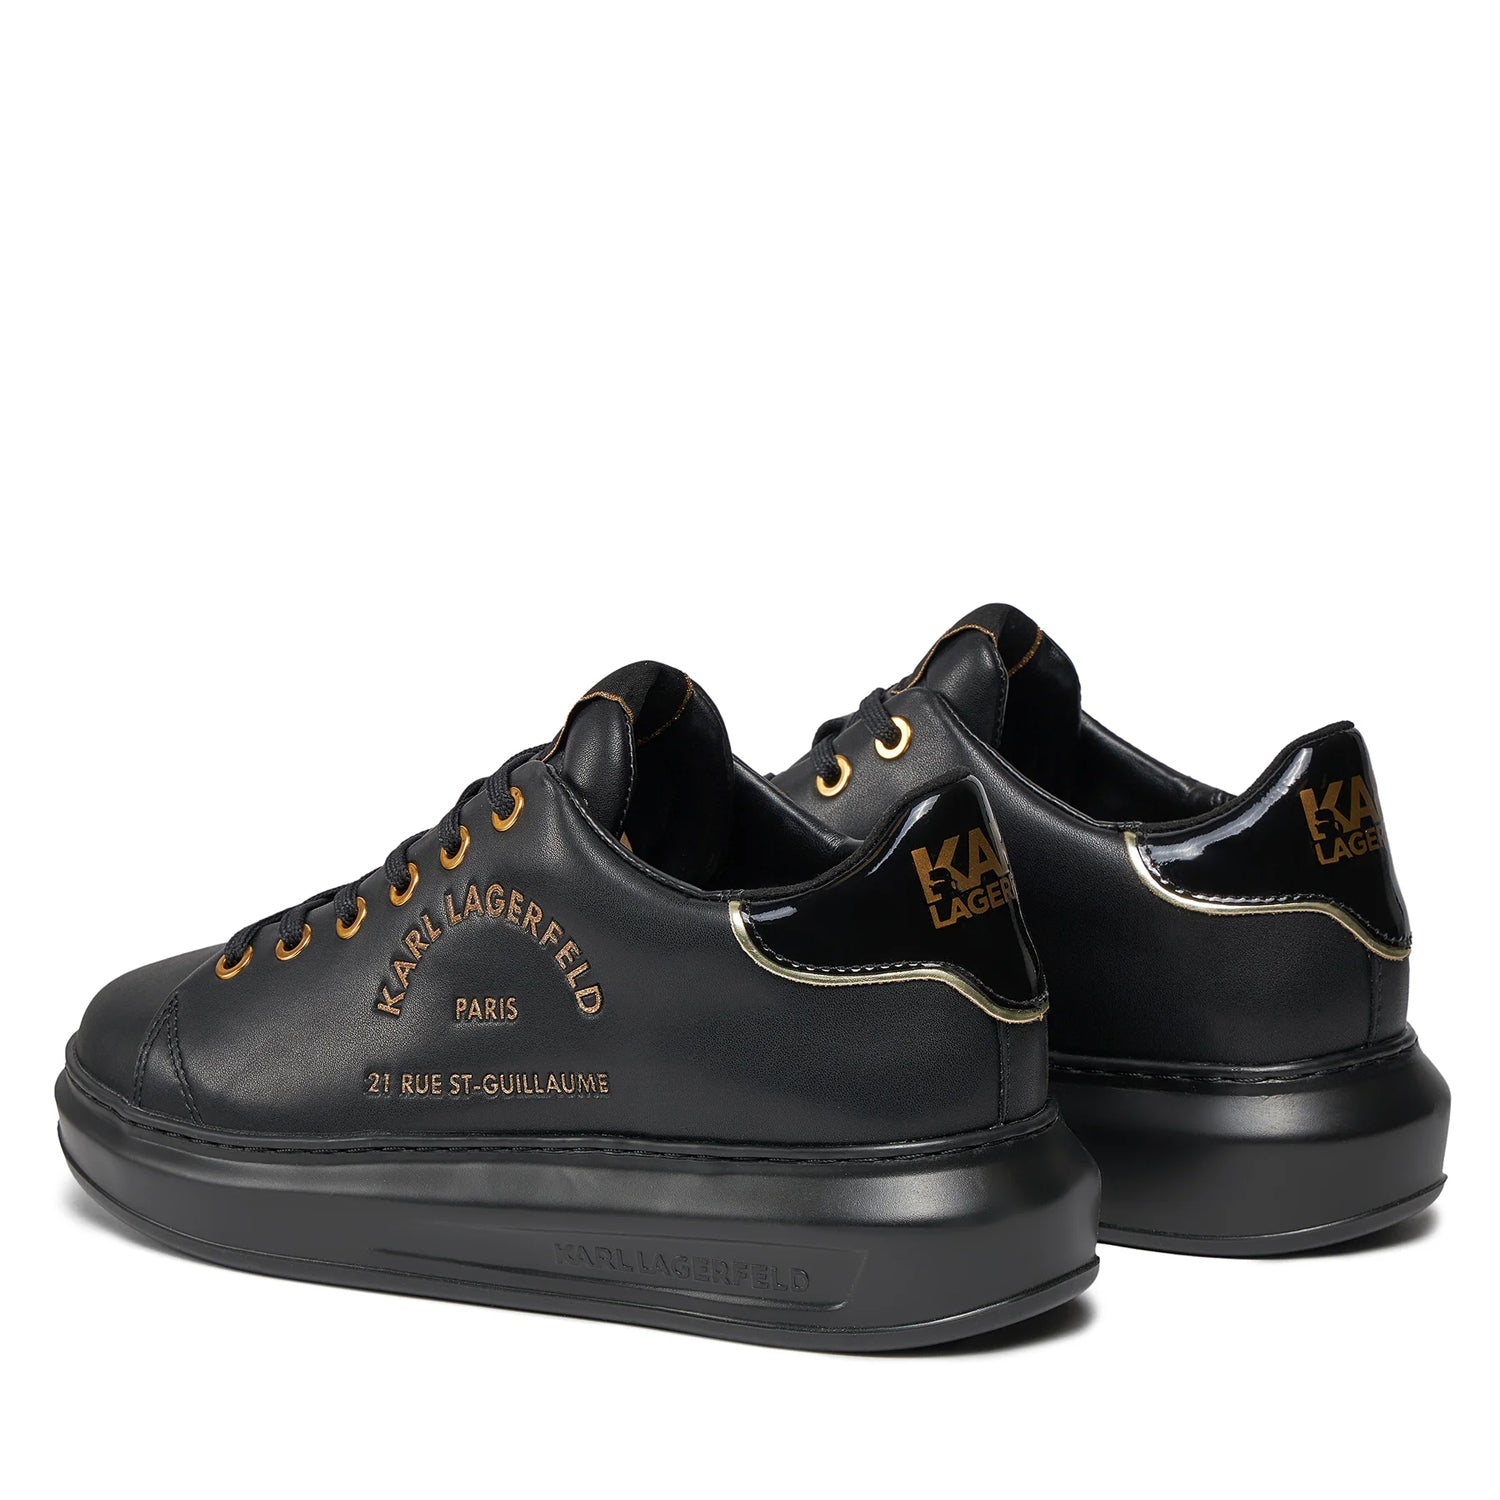 Karl Lagerfeld Sapatilhas Sneakers Shoes Kl62539f Blk Gold Preto Ouro_shot2